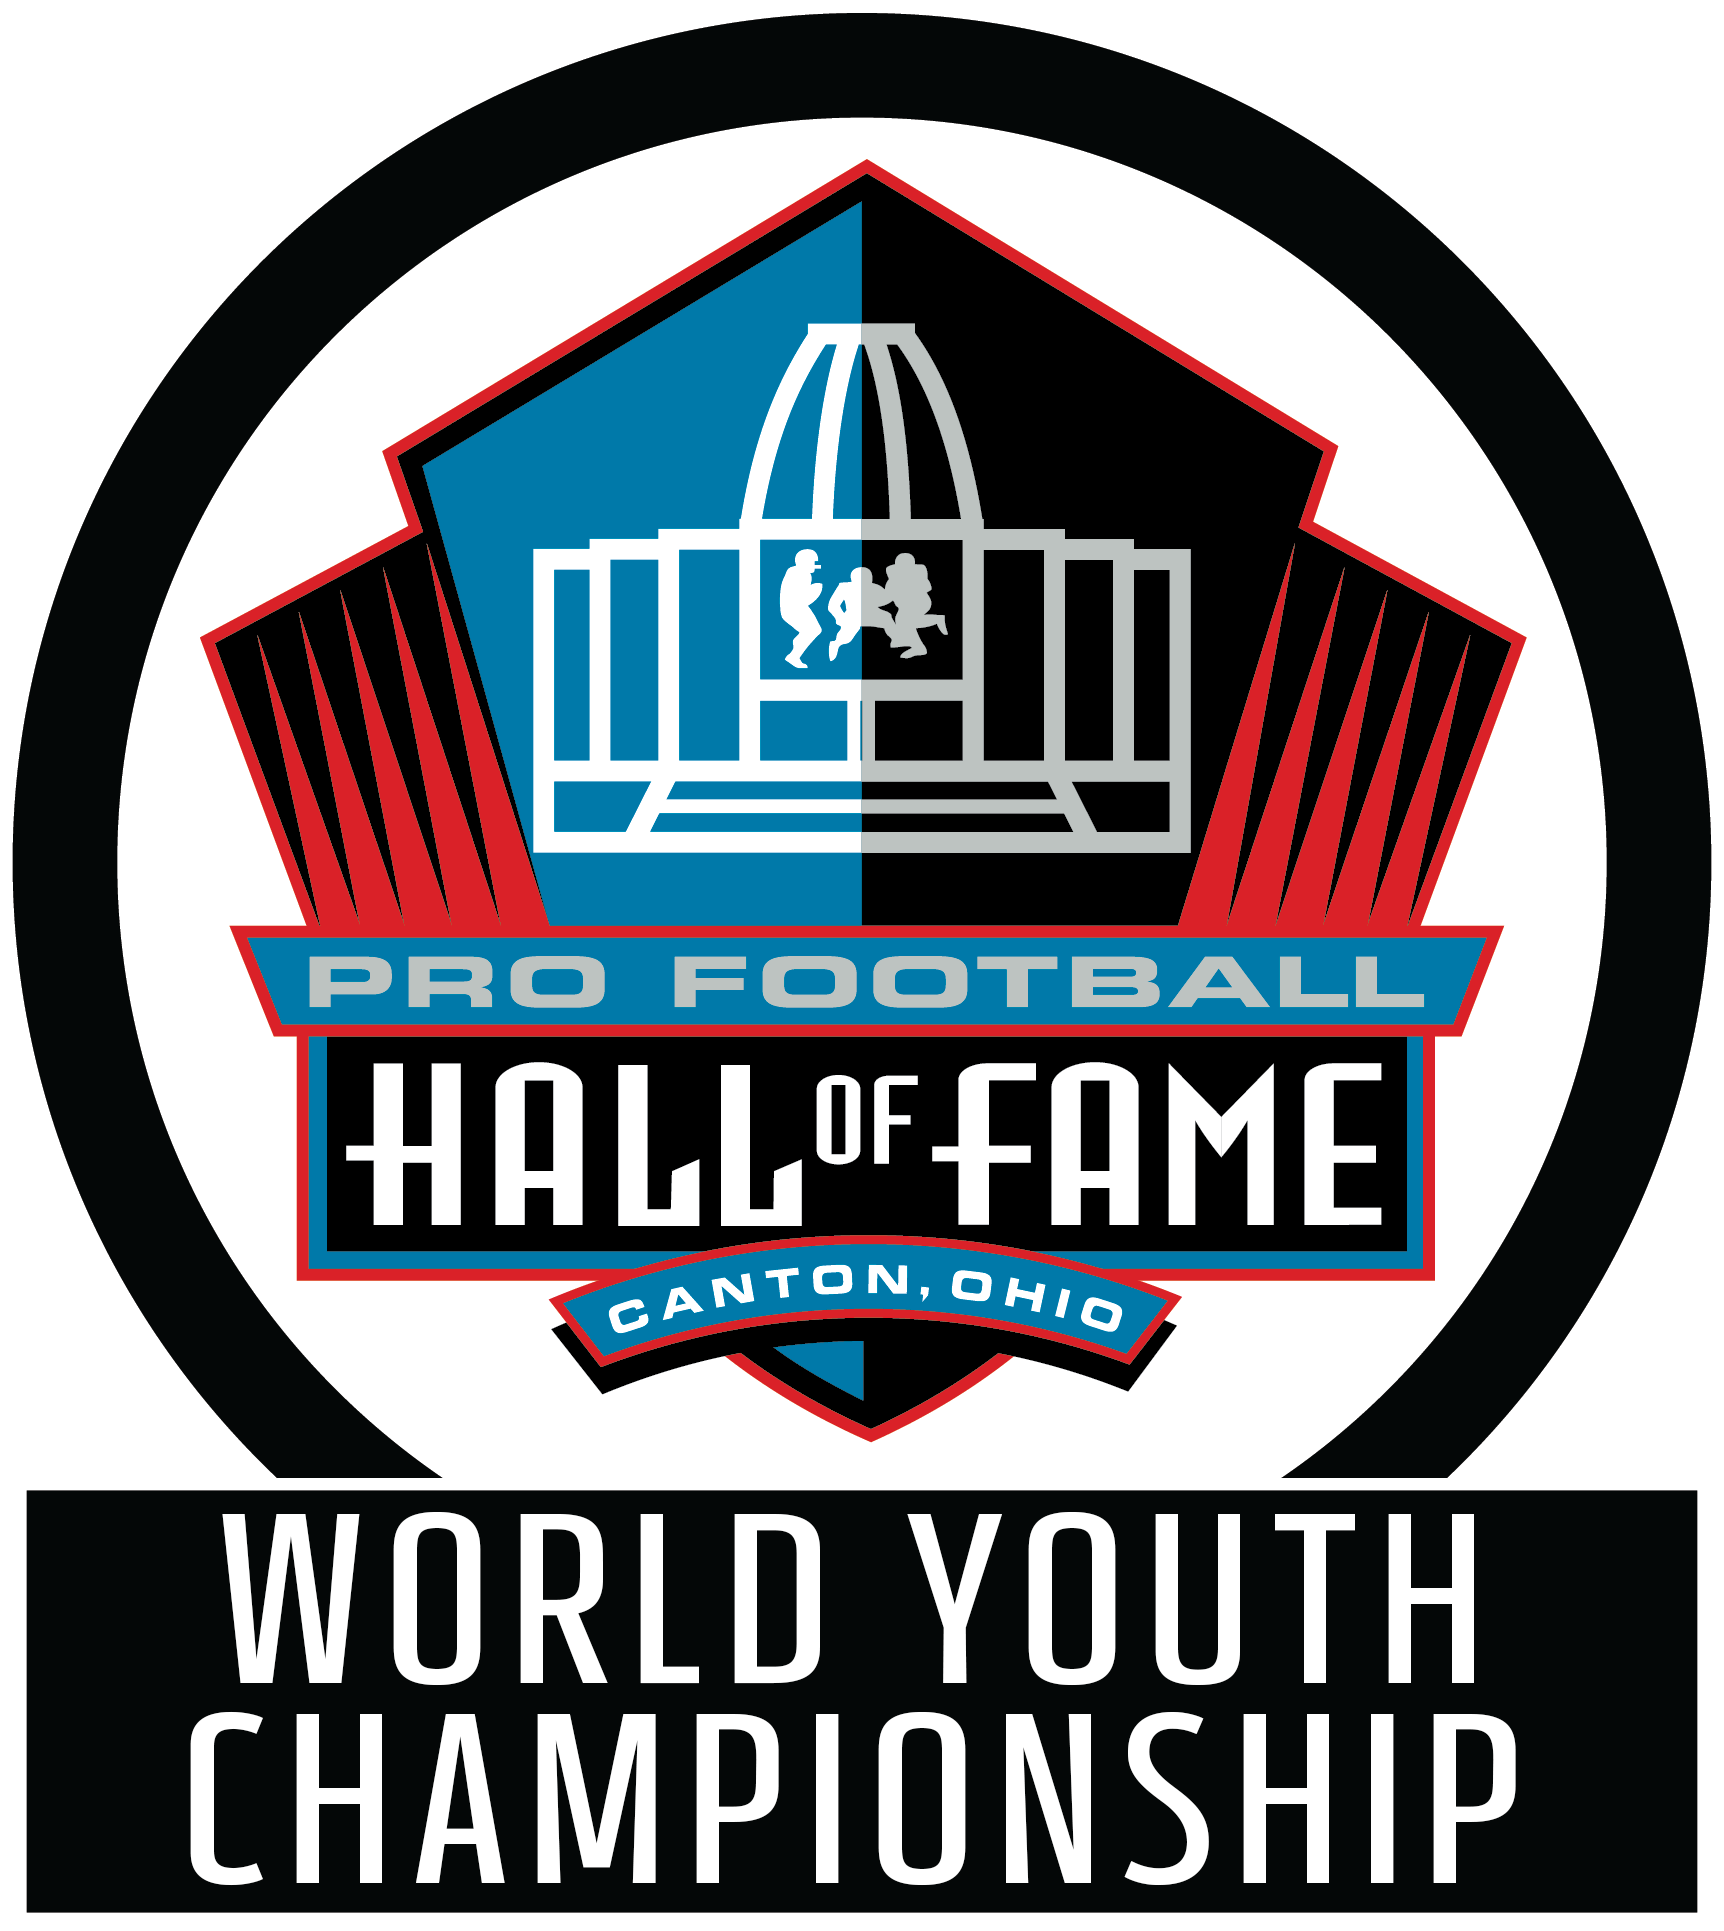 Youth Football Championship - Pro Football Hall Of Fame Academy (1724x1931)